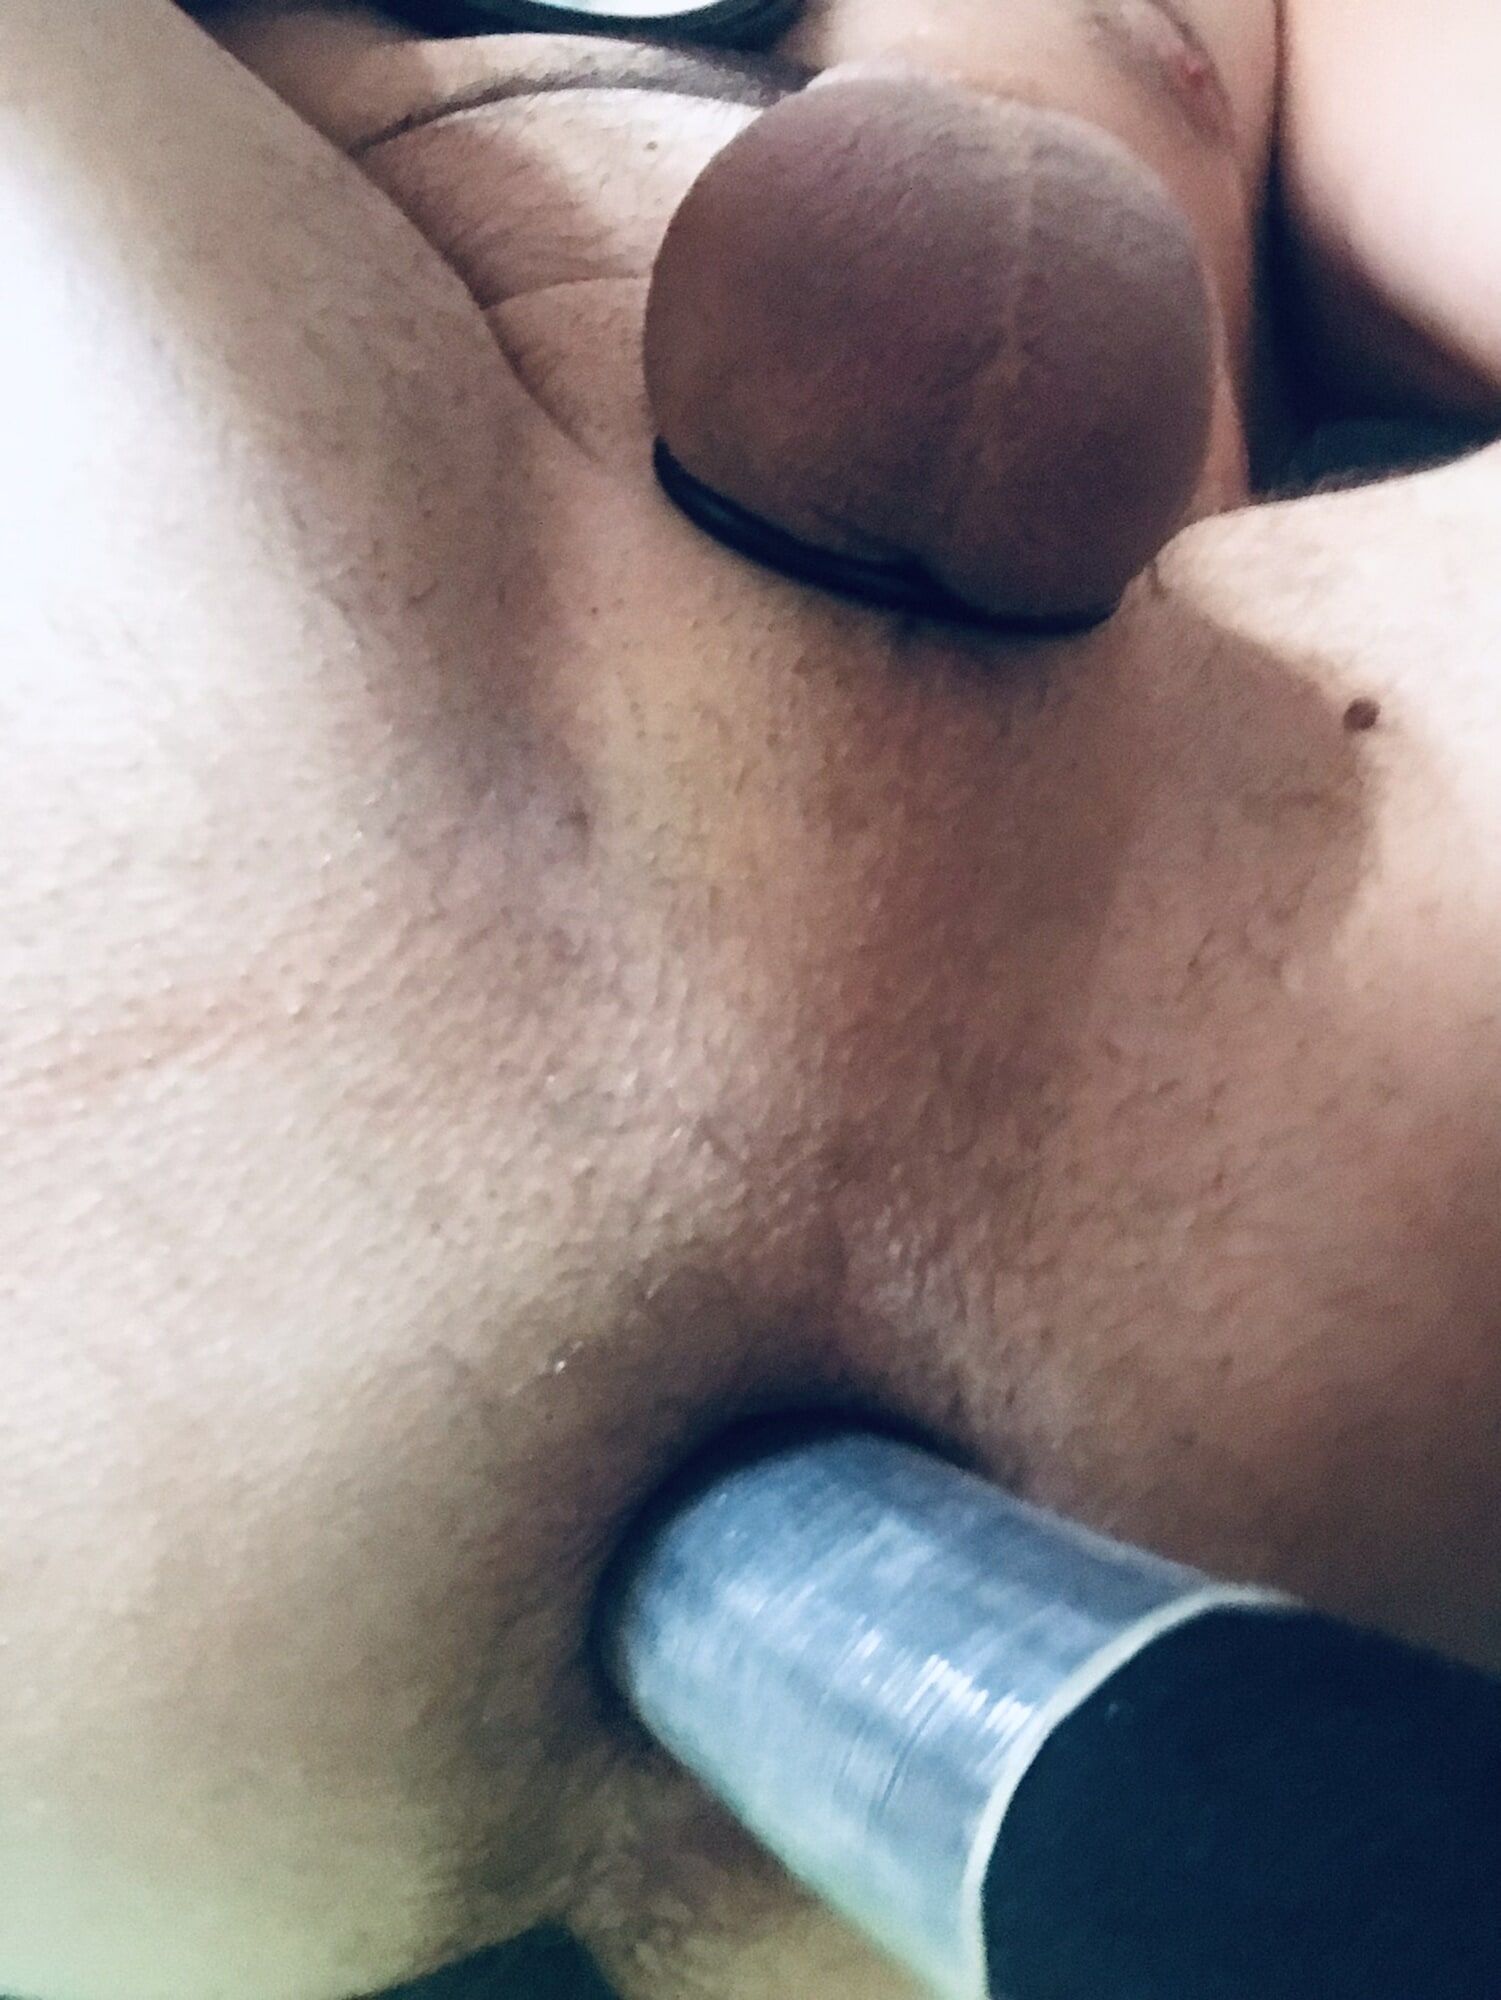  I tried my new Cockring